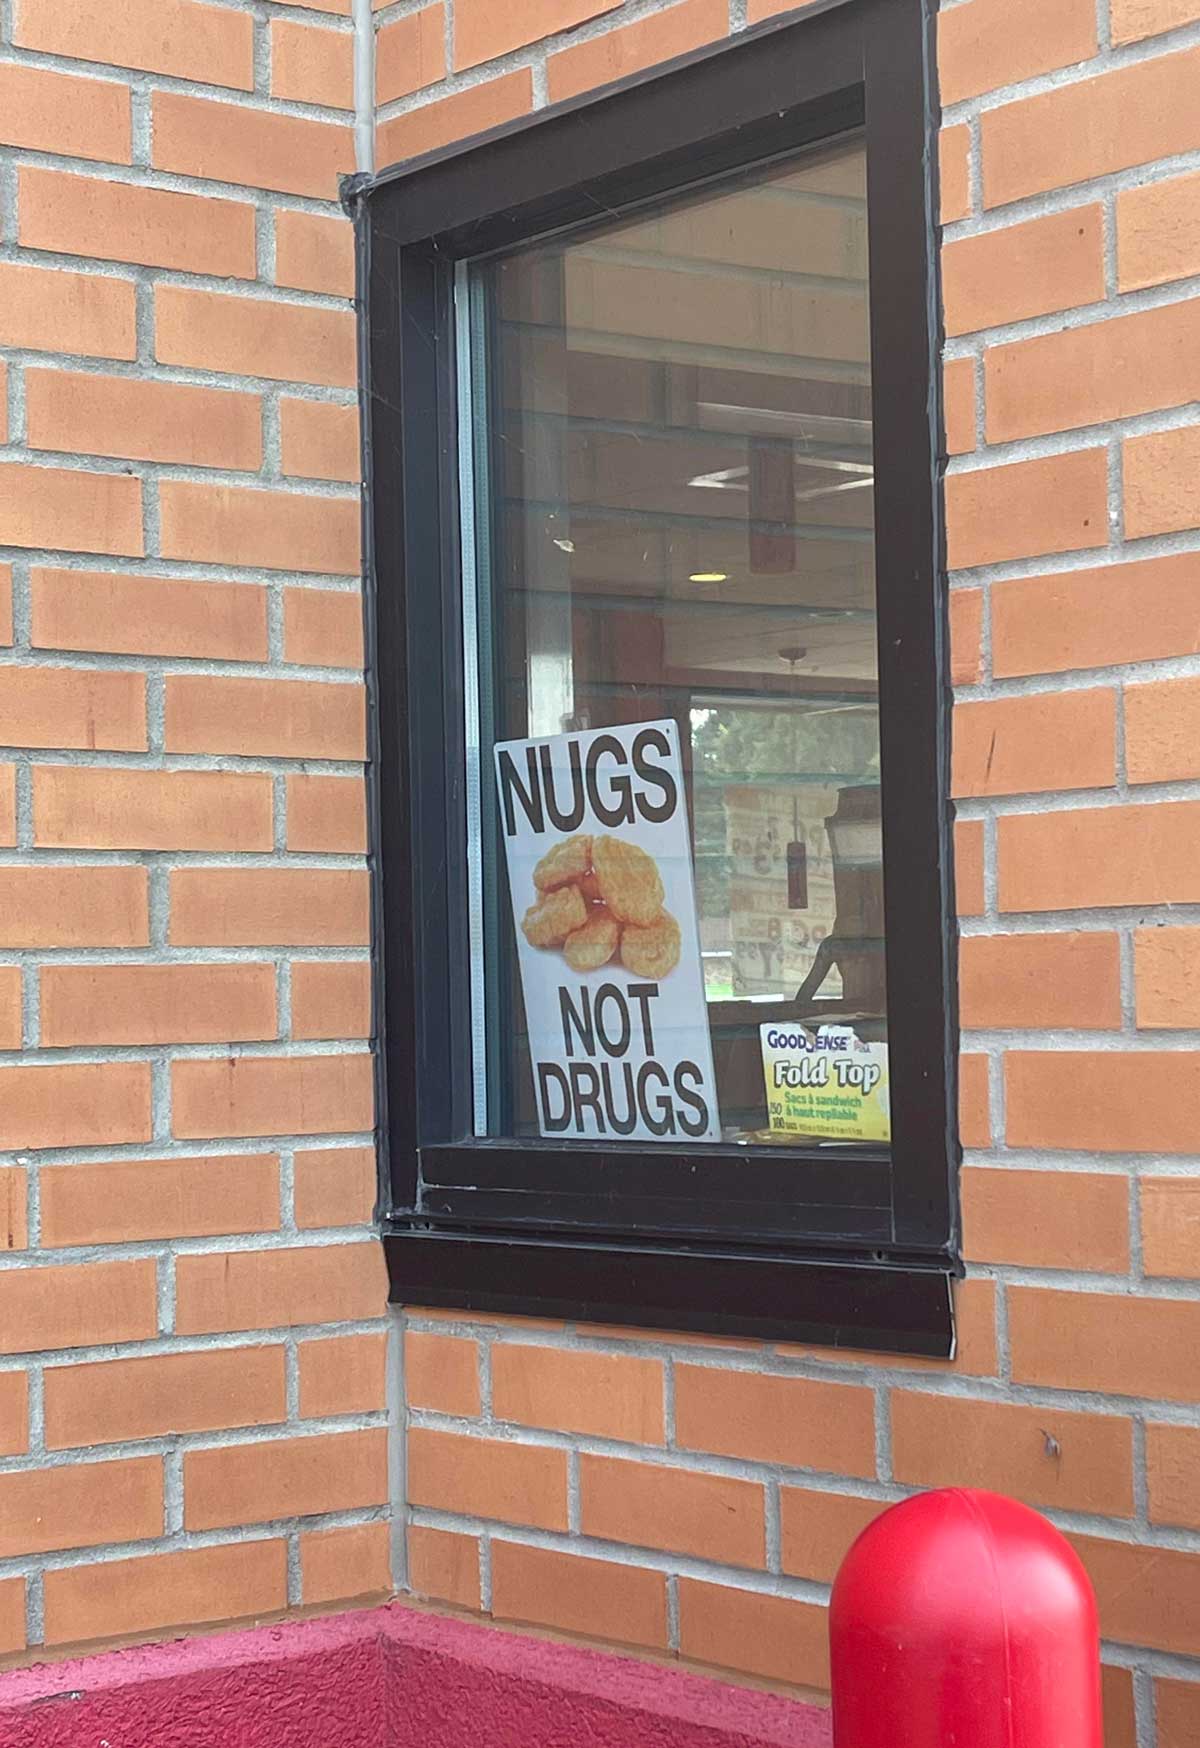 Posted in the drive thru window of my local Popeyes